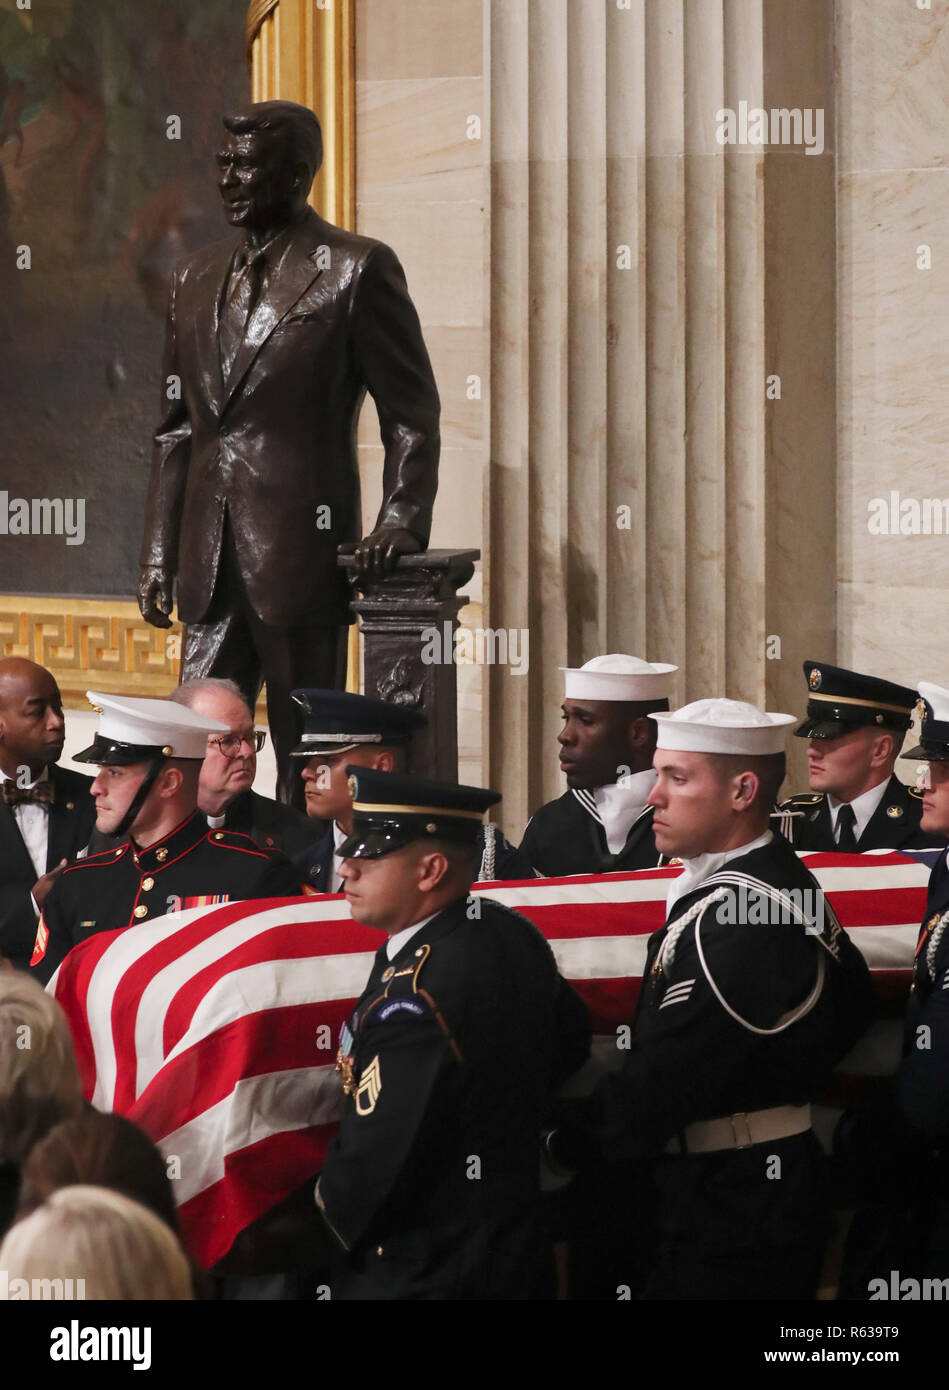 Washington, United States Of America. 03rd Dec, 2018. A U.S. military honor guard carries the casket of former U.S. President George H.W. Bush past the statue of former President Ronald Reagan as it arrives to lie in state in the U.S. Capitol Rotunda in Washington, U.S., December 3, 2018. REUTERS/Jonathan Ernst/Pool | usage worldwide Credit: dpa/Alamy Live News Stock Photo